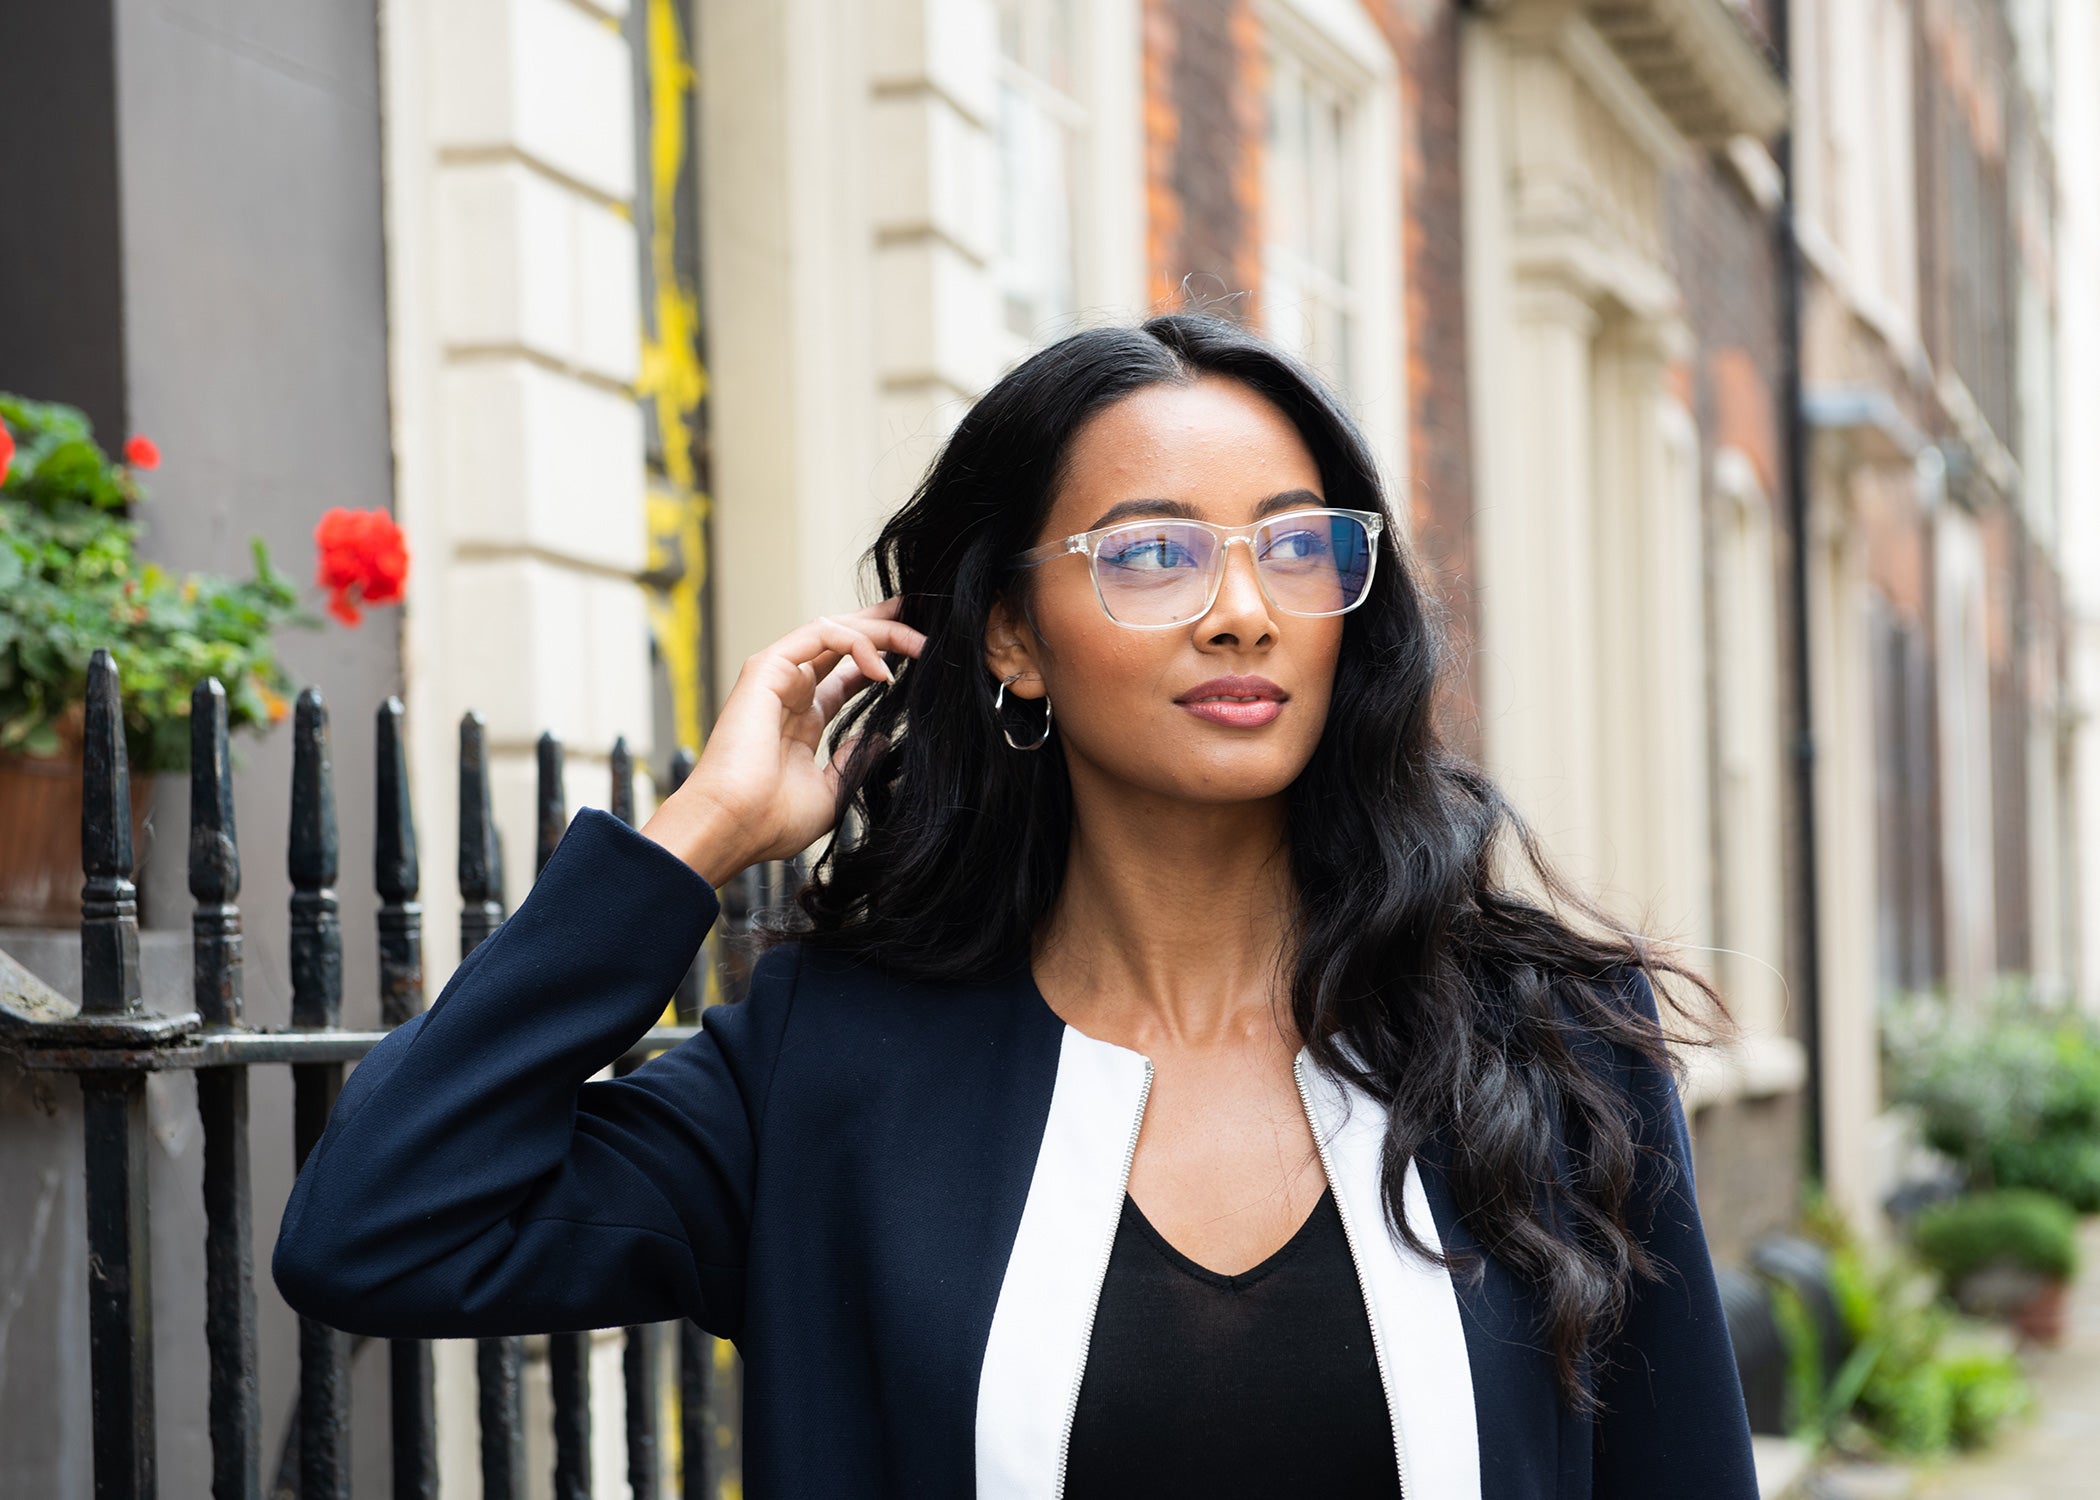 Blue Light Glasses: Why You Need Them & Where to Buy